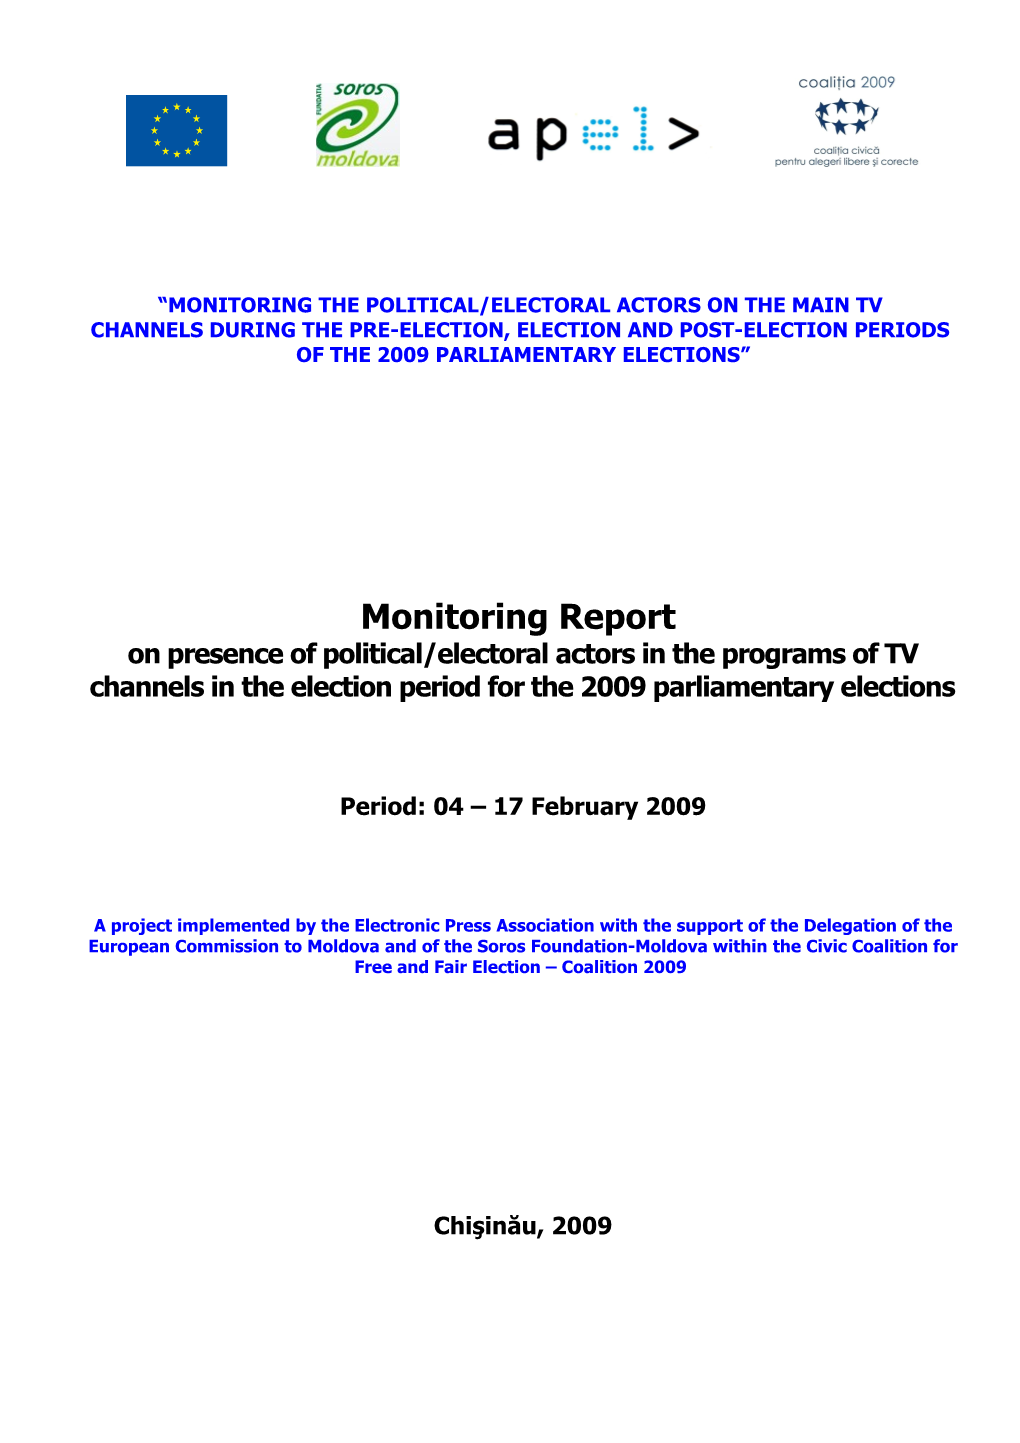 Monitoring Report on Presence of Political/Electoral Actors in the Programs of TV Channels in the Election Period for the 2009 Parliamentary Elections